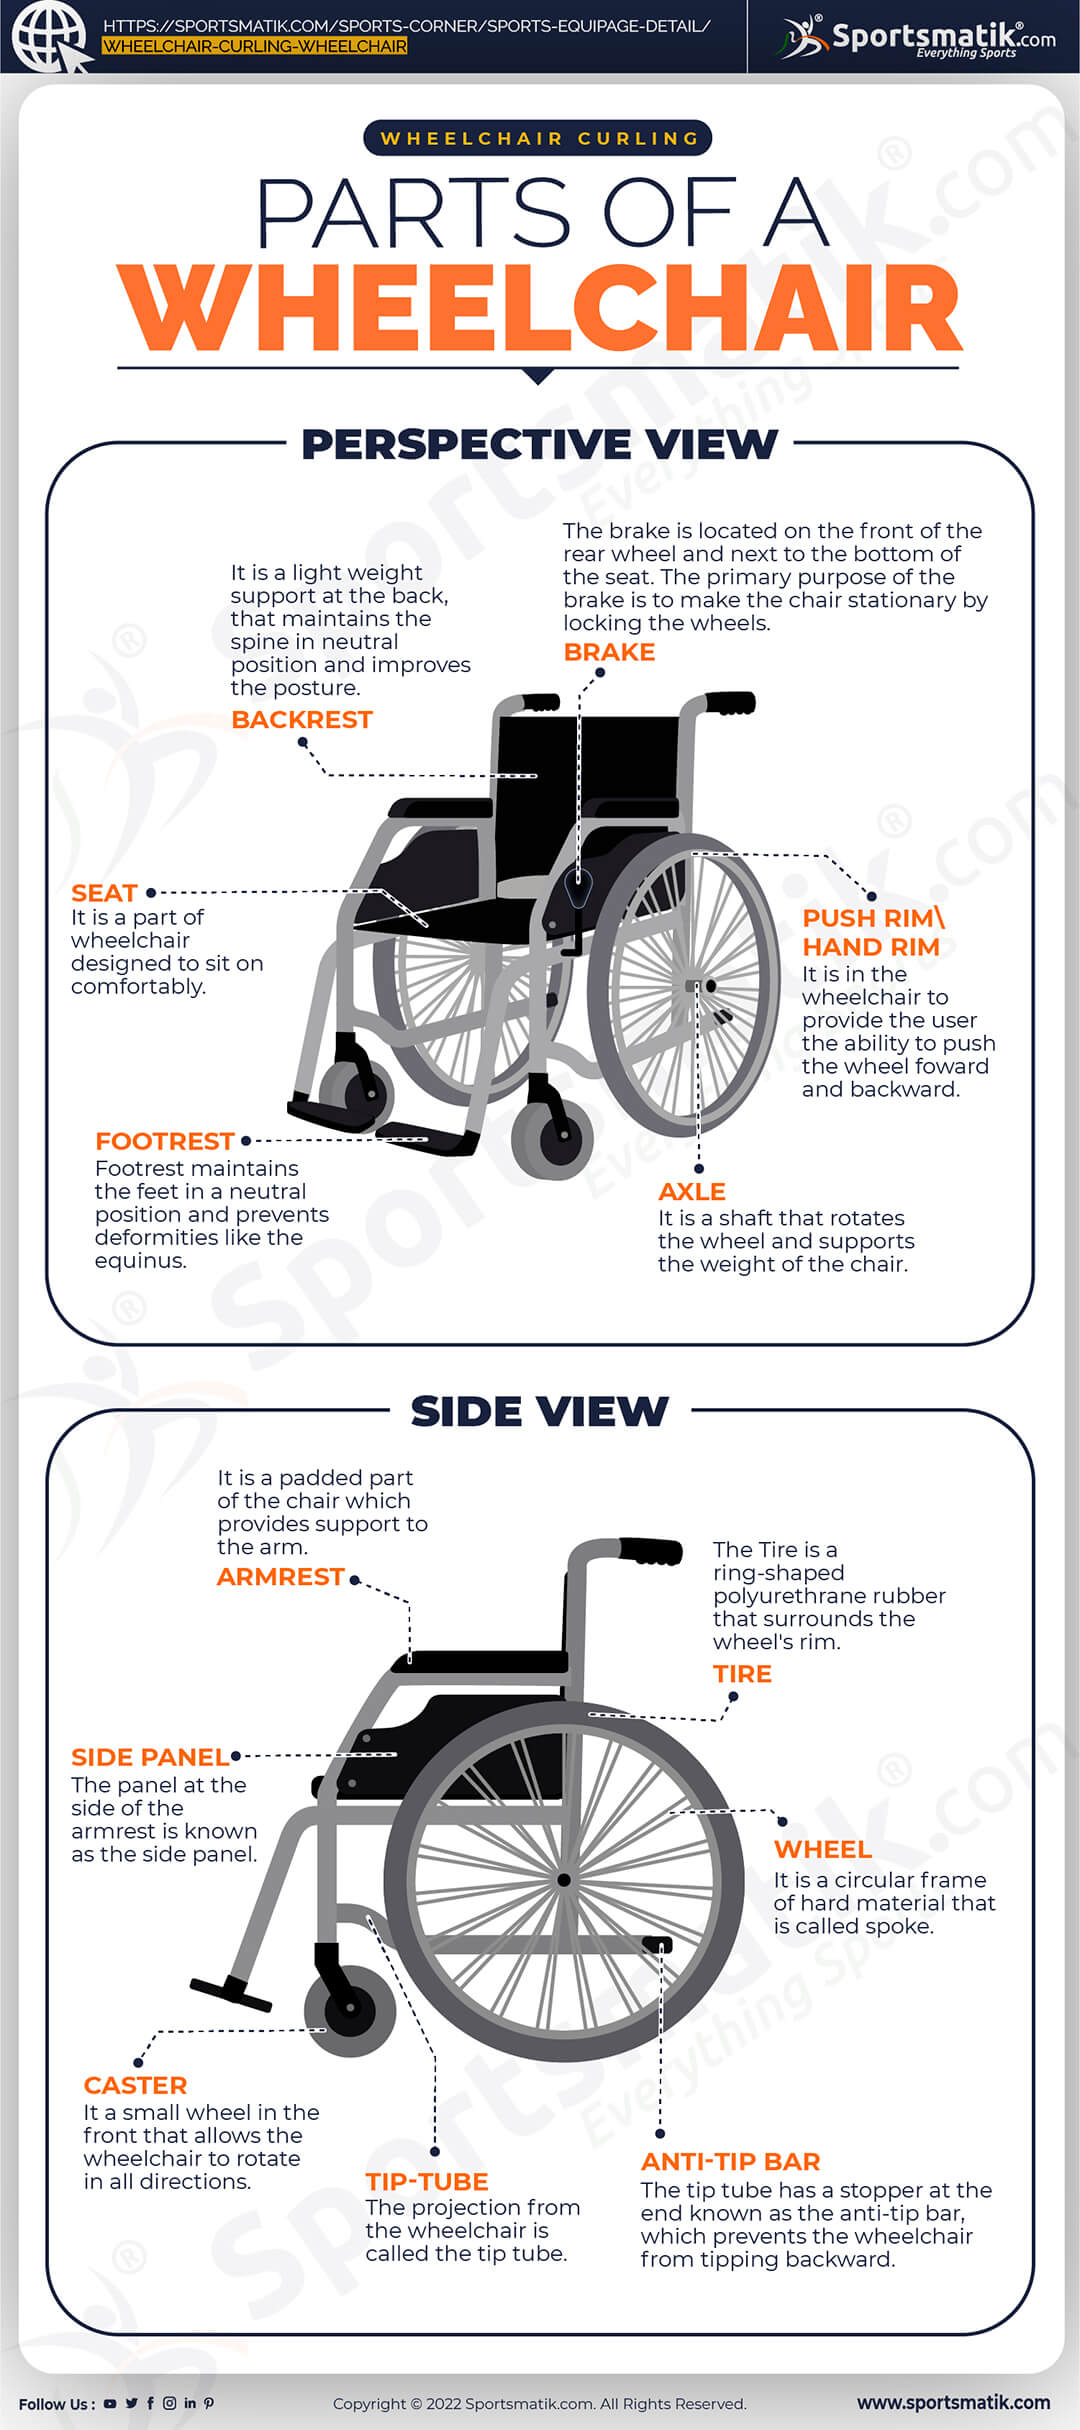 parts of a wheelchair curling